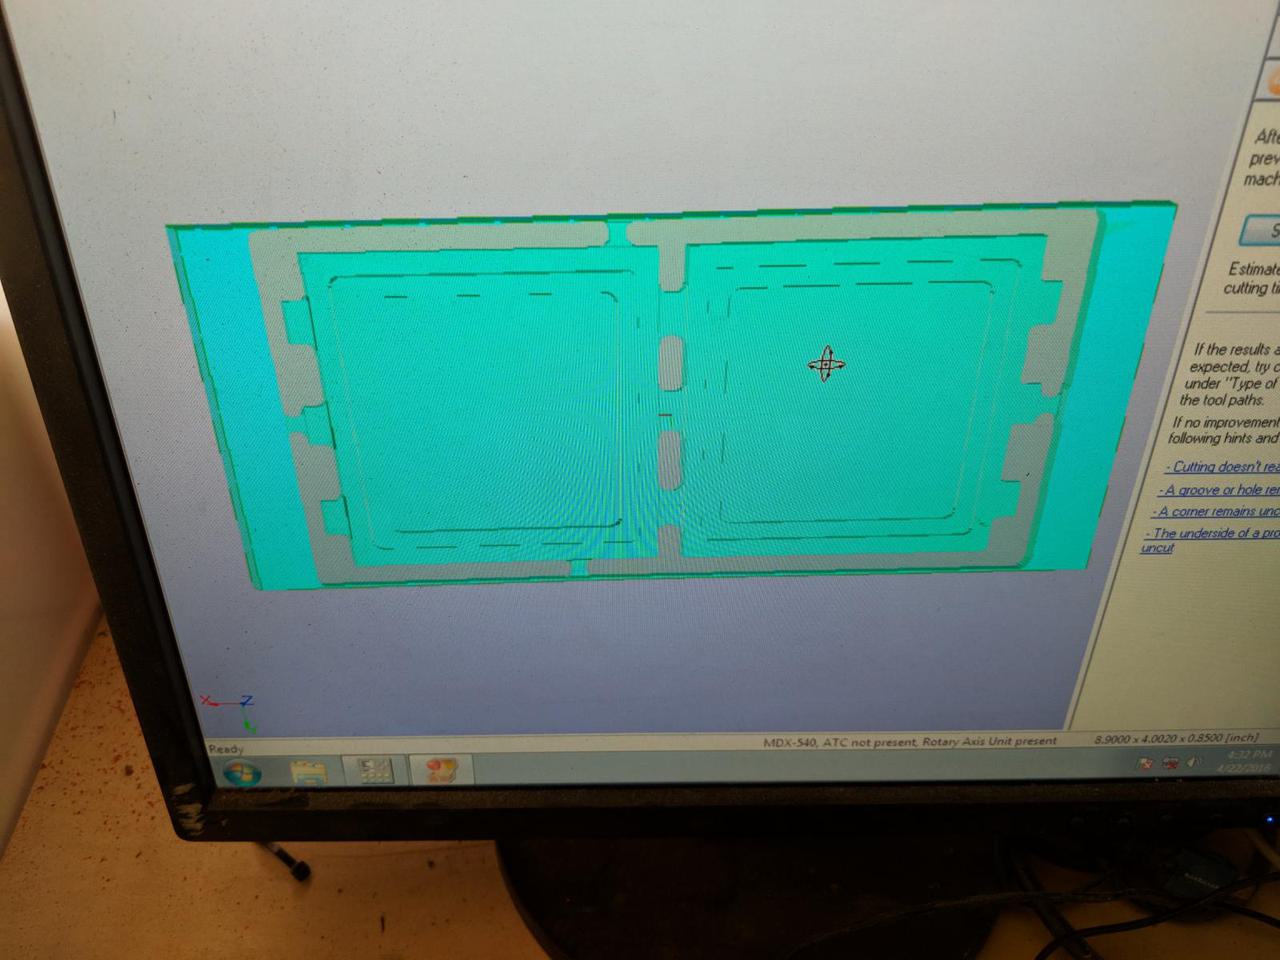 computer monitor showing 3D image of properly milled box with cuts all around the sides.